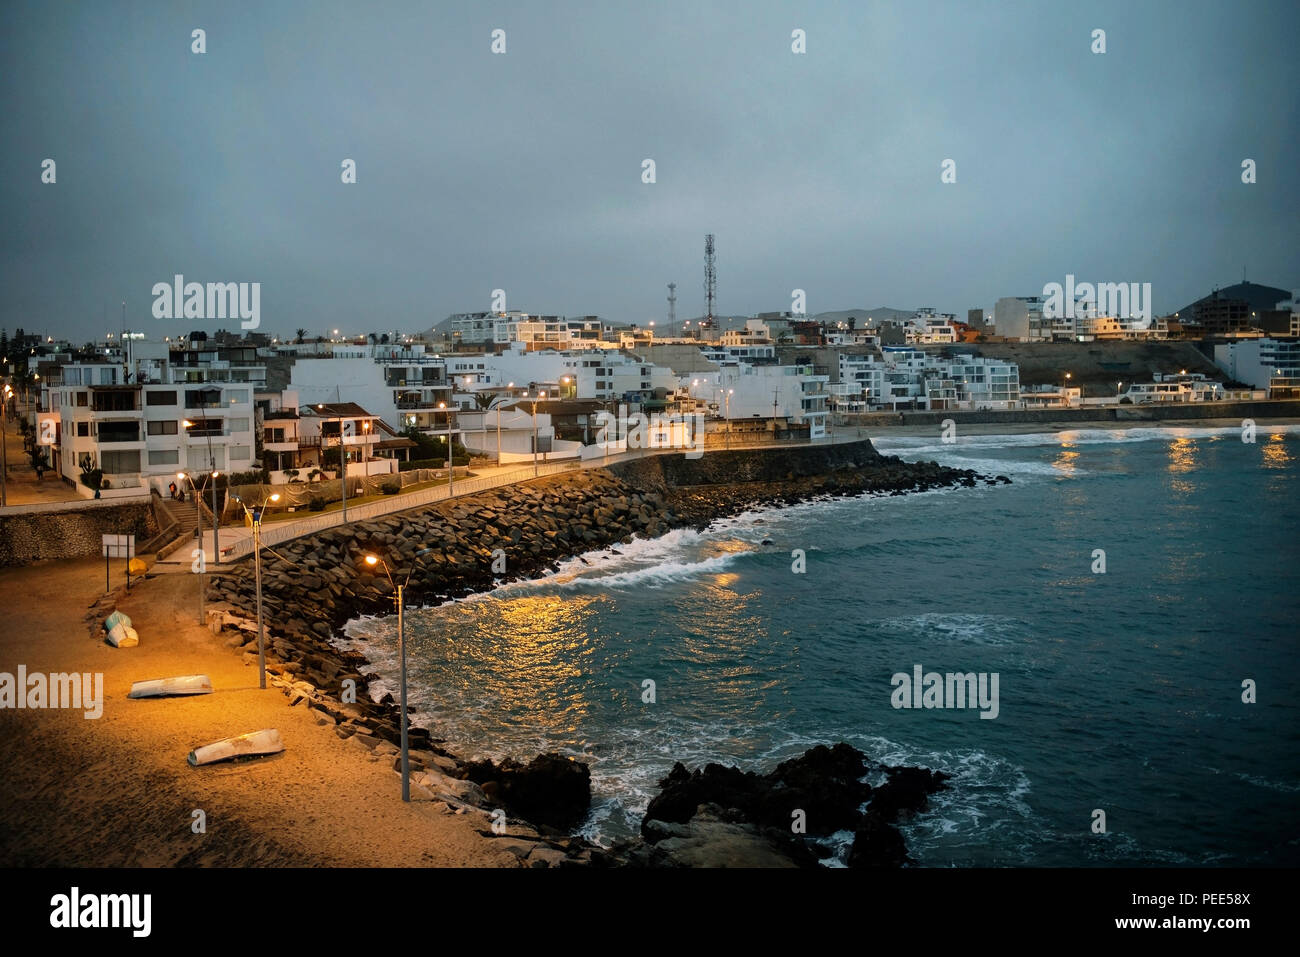 Beachfront and evening lights in Punta Hermosa surfers town, viewed from 'La Isla' (rocky island joined to the land). Lima Province, Peru. Jul 2018 Stock Photo